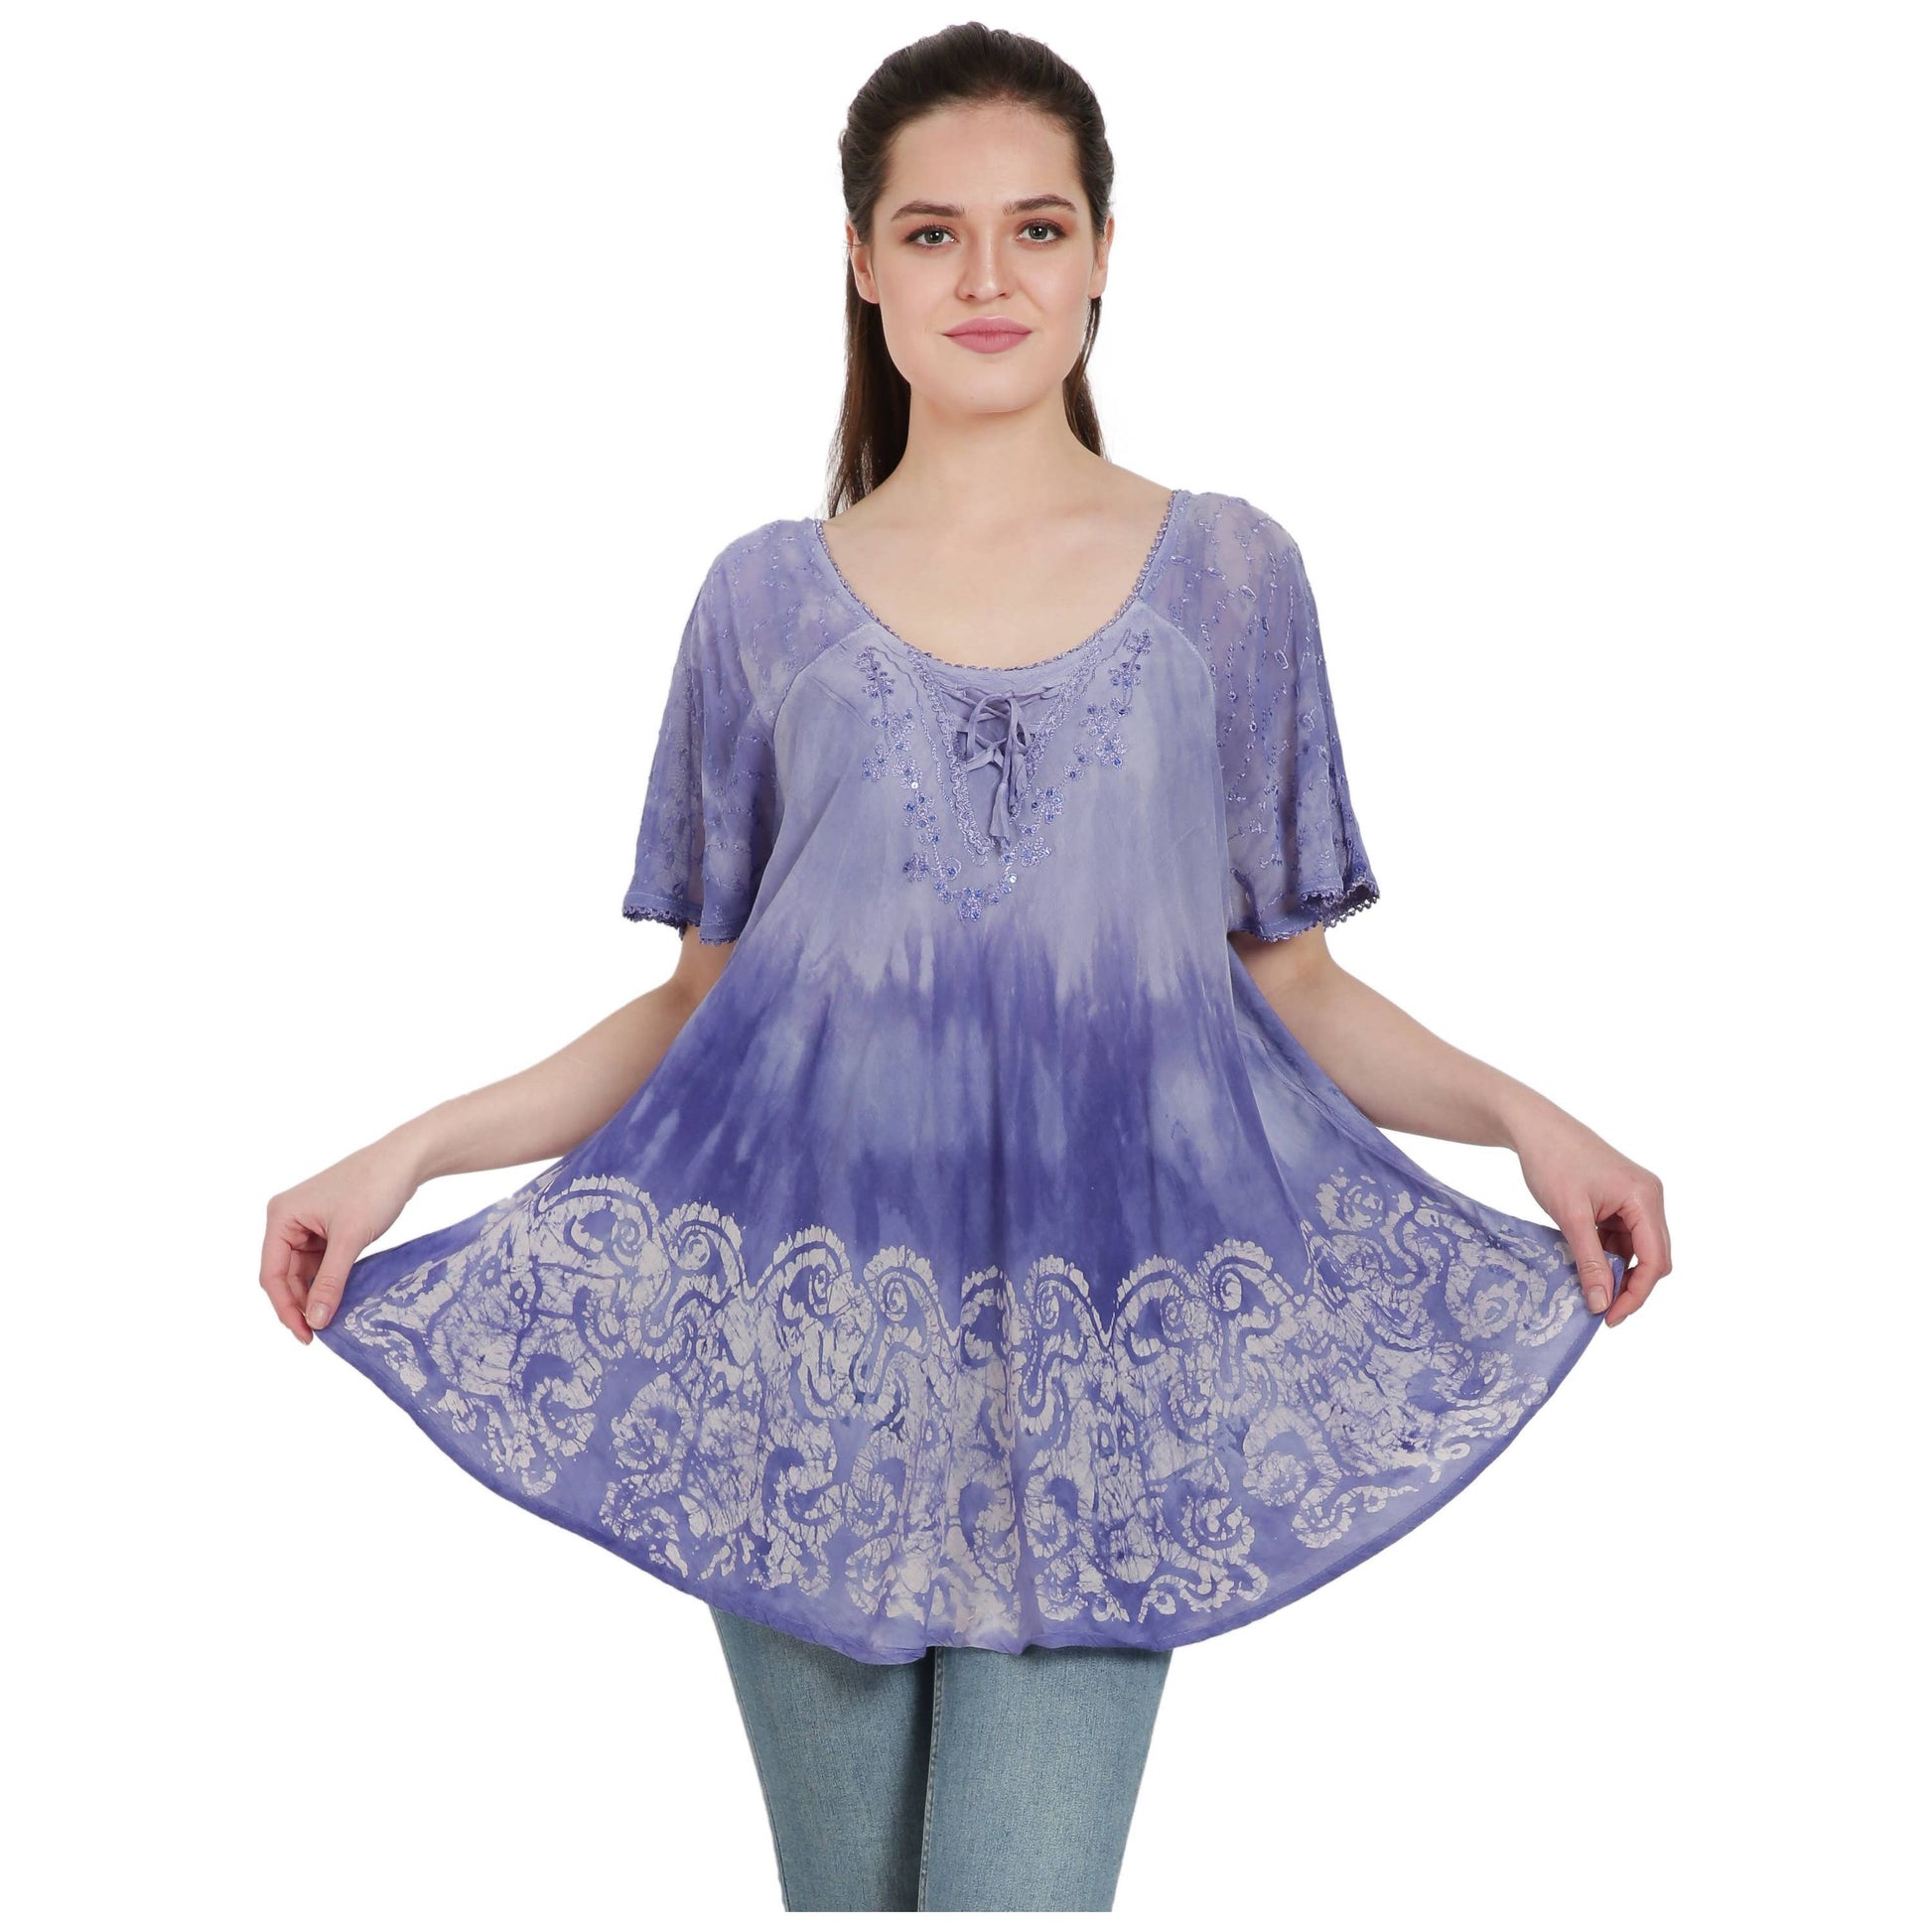 Ritika Blouse- Assorted Colors - Rhapsody and Renascence -shirt - boho, misses, plus, plus size, short sleeved, summer, tops